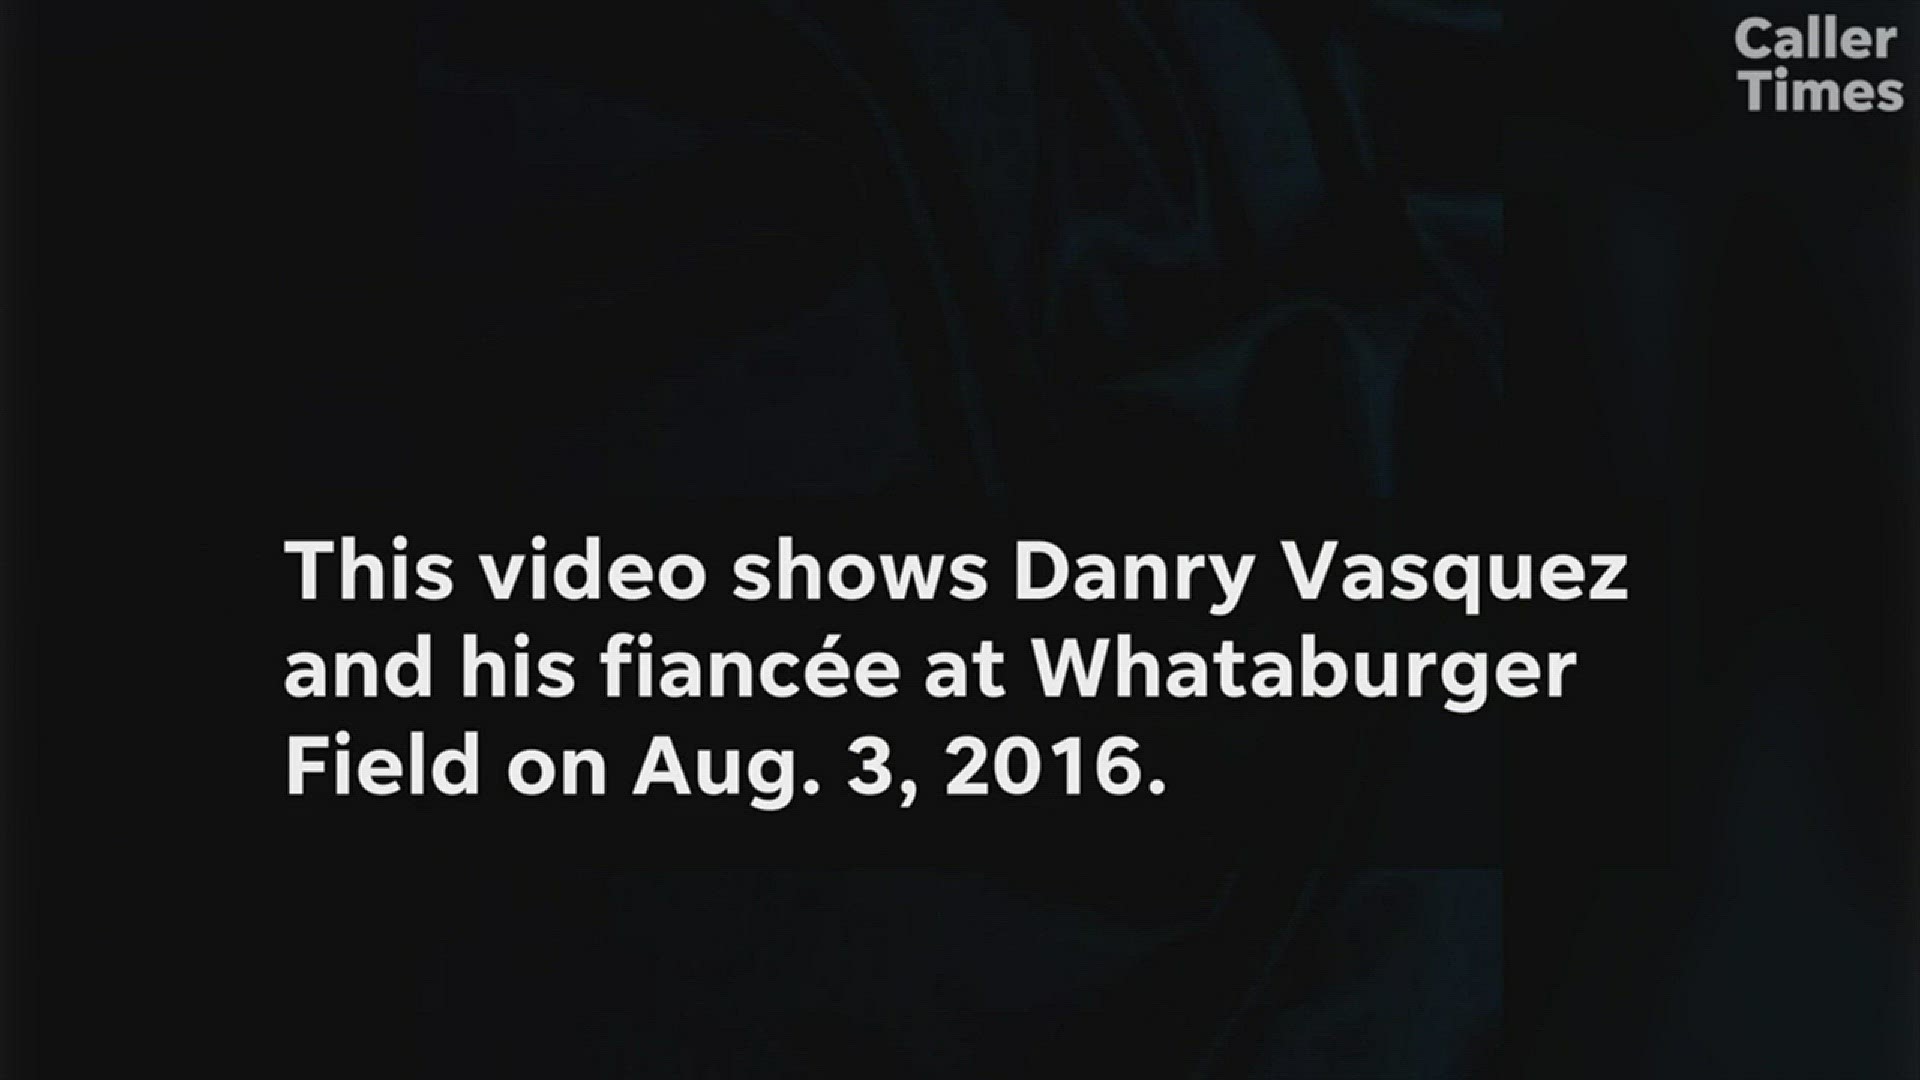 Surveillance cameras in a stairwell at Whataburger Field shows then-Corpus Christi Hook Danry Vasquez repeatedly striking his fianc�e.